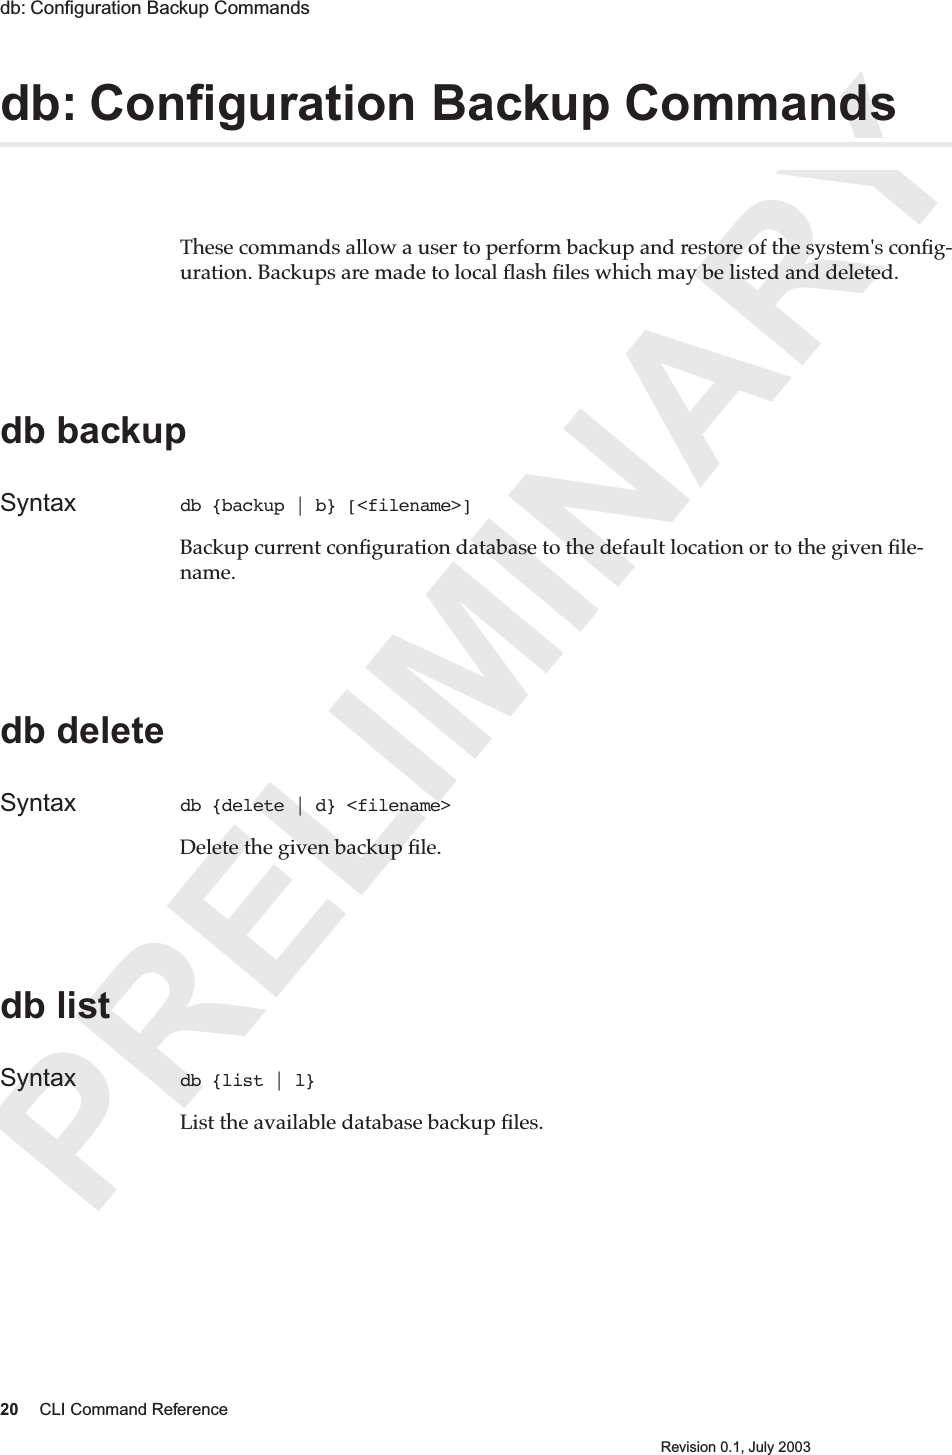 PRELIMINARY20 CLI Command ReferenceRevision 0.1, July 2003db: Conﬁguration Backup Commands db: Conﬁguration Backup Commands These commands allow a user to perform backup and restore of the system&apos;s conﬁg-uration. Backups are made to local ﬂash ﬁles which may be listed and deleted.db backupSyntax db {backup | b} [&lt;filename&gt;]Backup current conﬁguration database to the default location or to the given ﬁle-name.db deleteSyntax db {delete | d} &lt;filename&gt;Delete the given backup ﬁle.db listSyntax db {list | l} List the available database backup ﬁles.